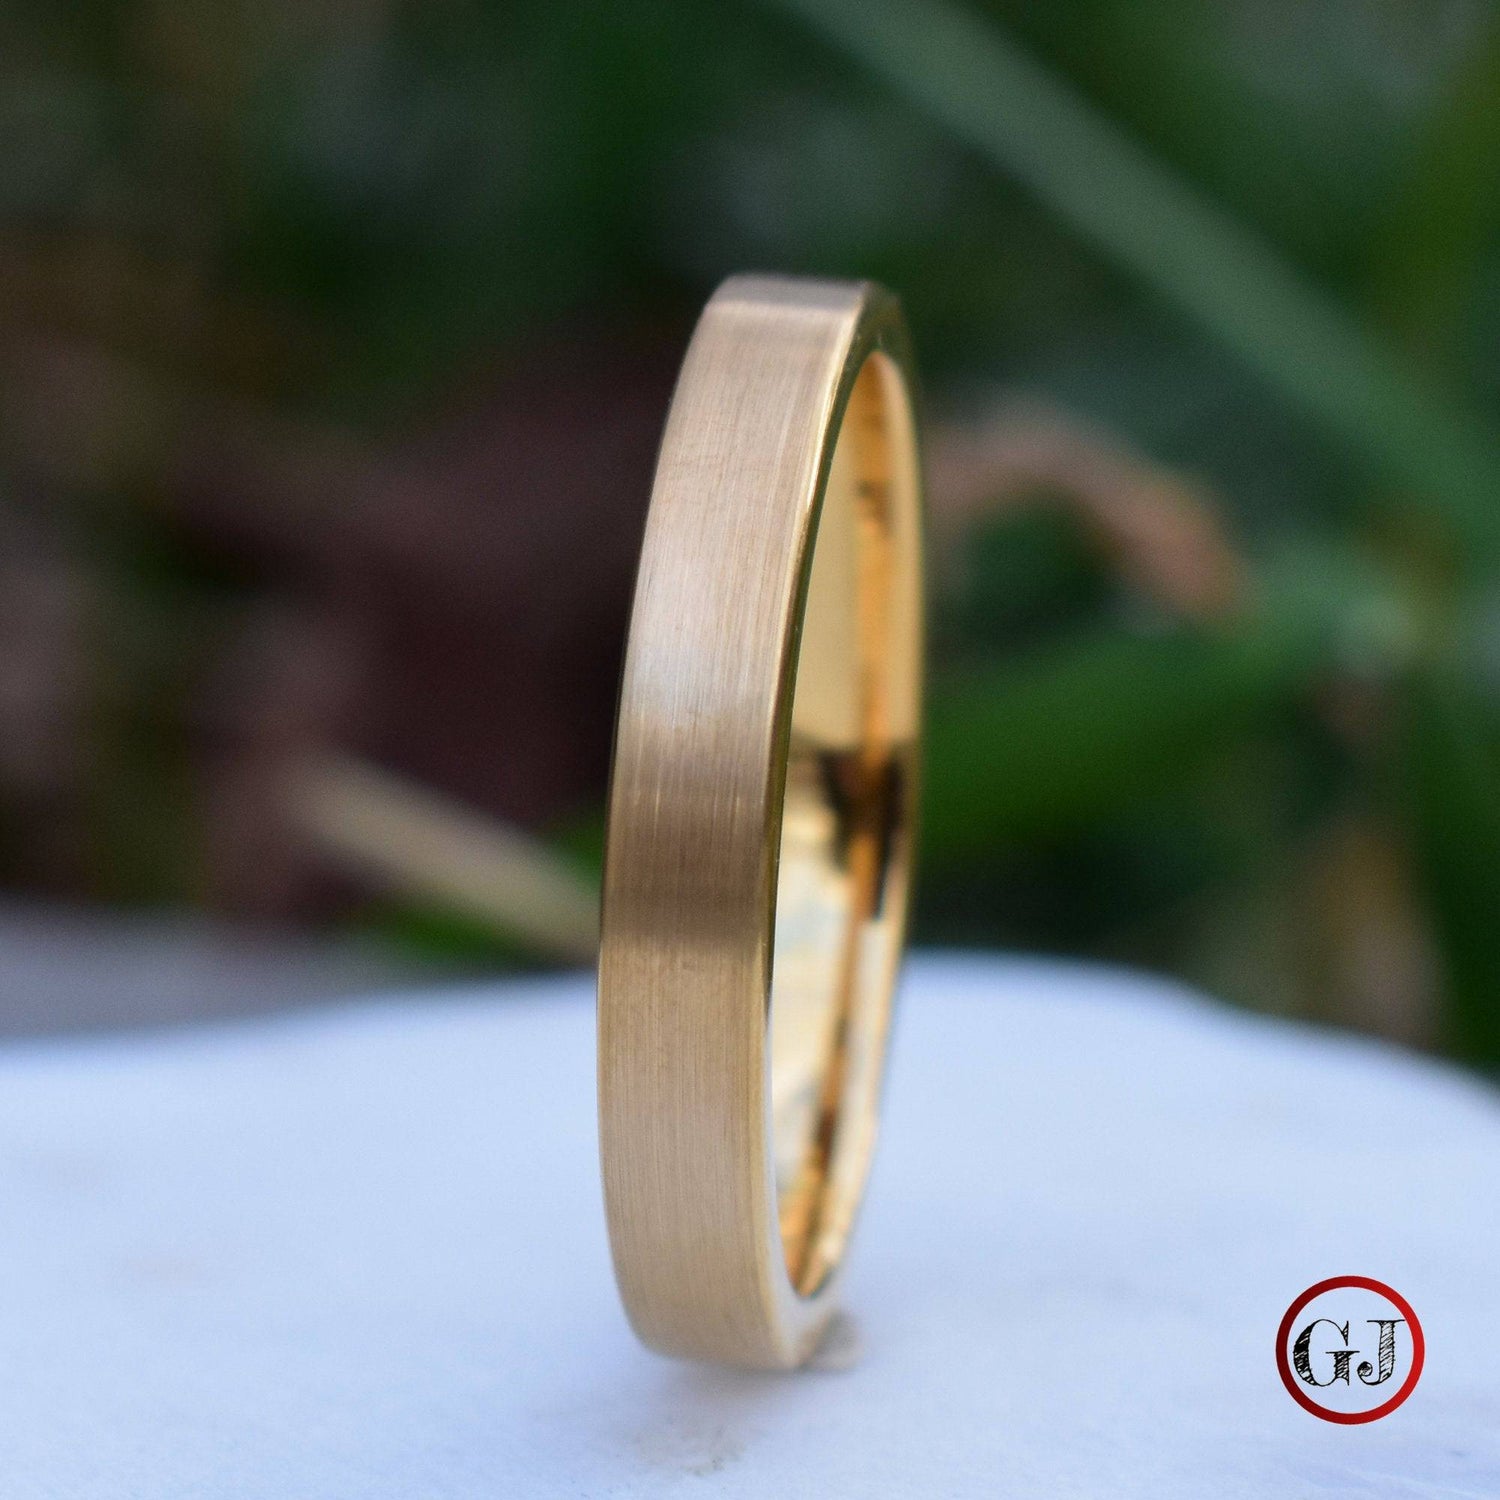 Tungsten Ring 4mm Brushed Gold Comfort fit band - Tungsten Titans